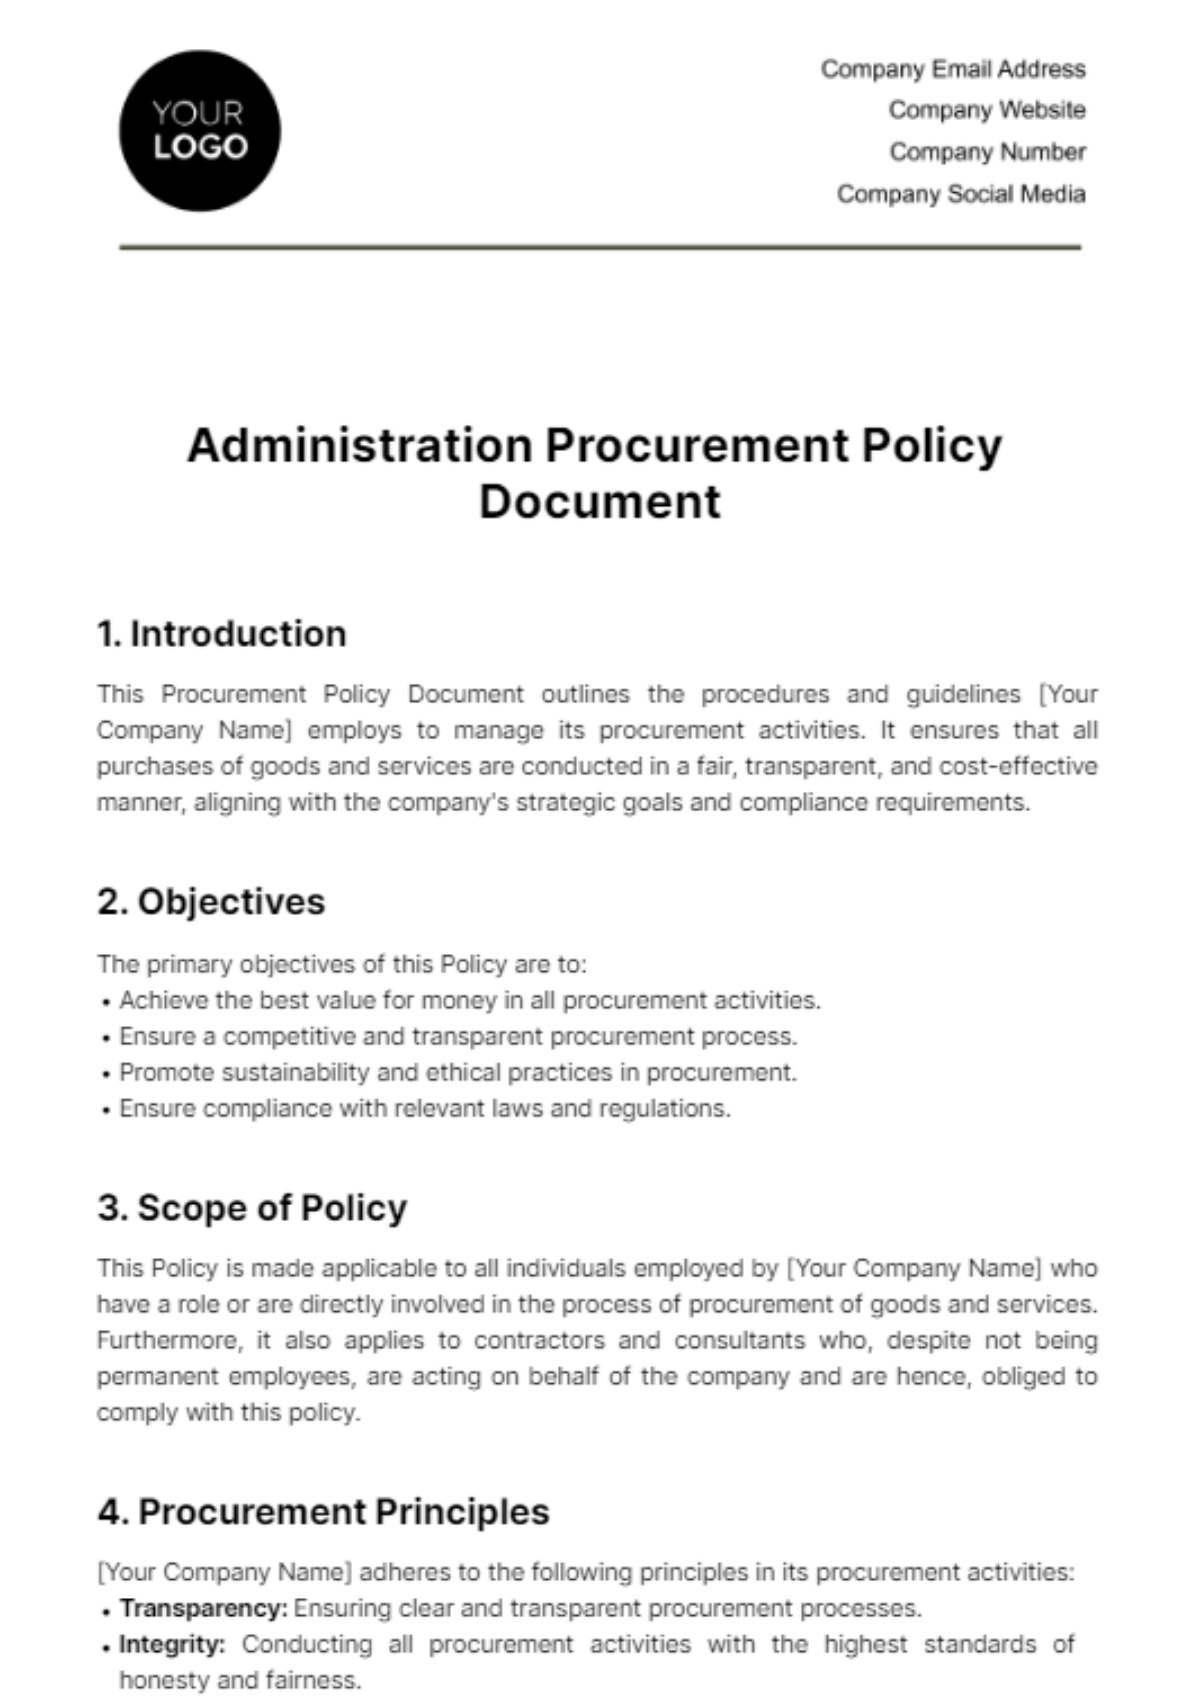 Free Administration Procurement Policy Document Template